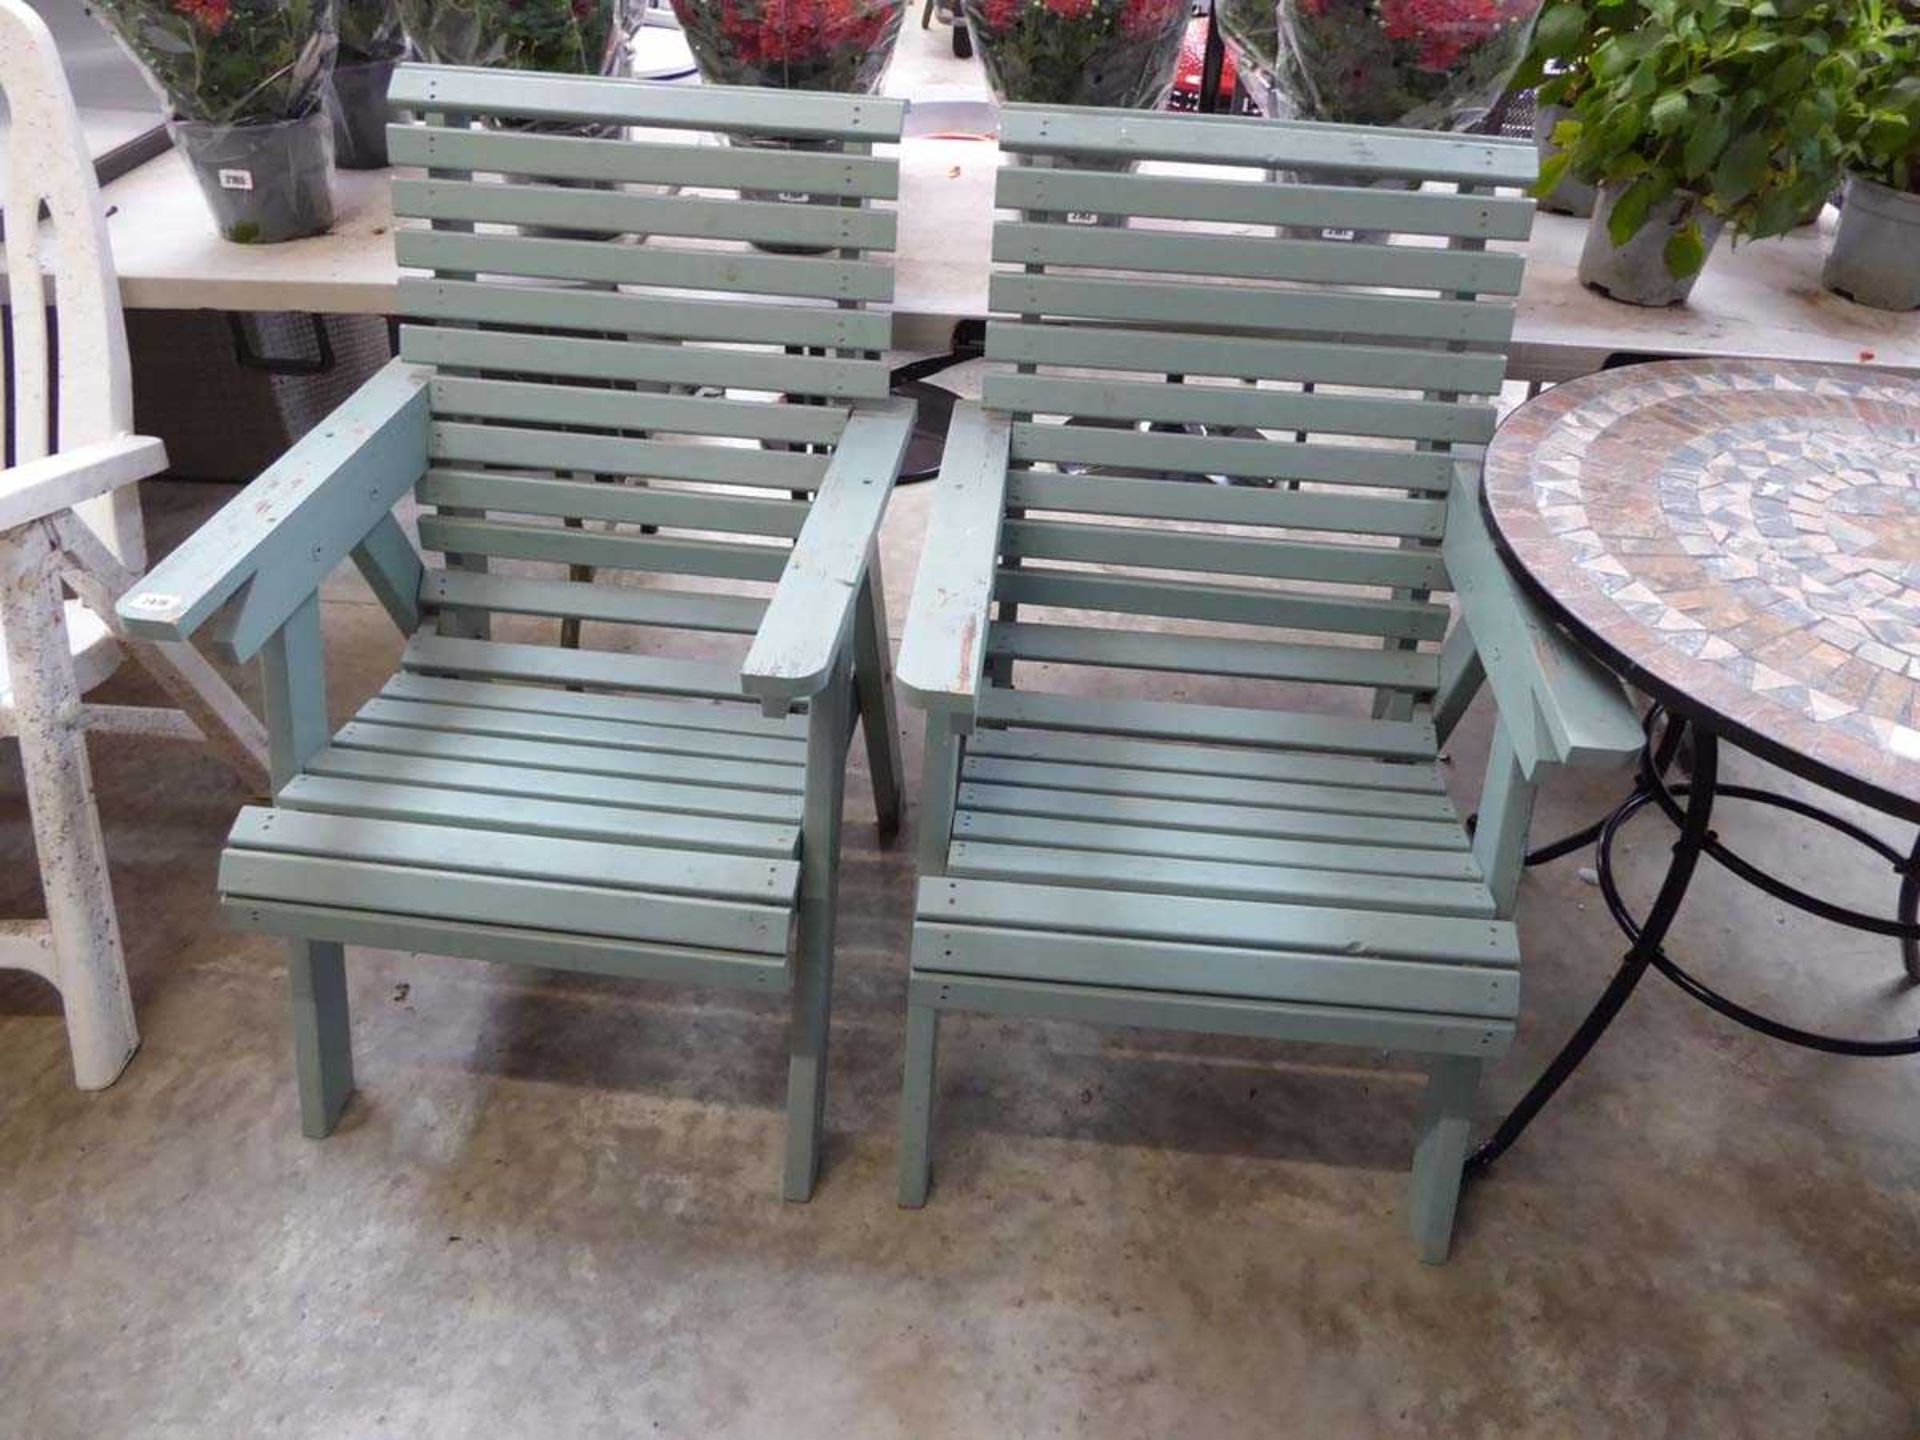 Pair of blue wooden slatted garden armchairs